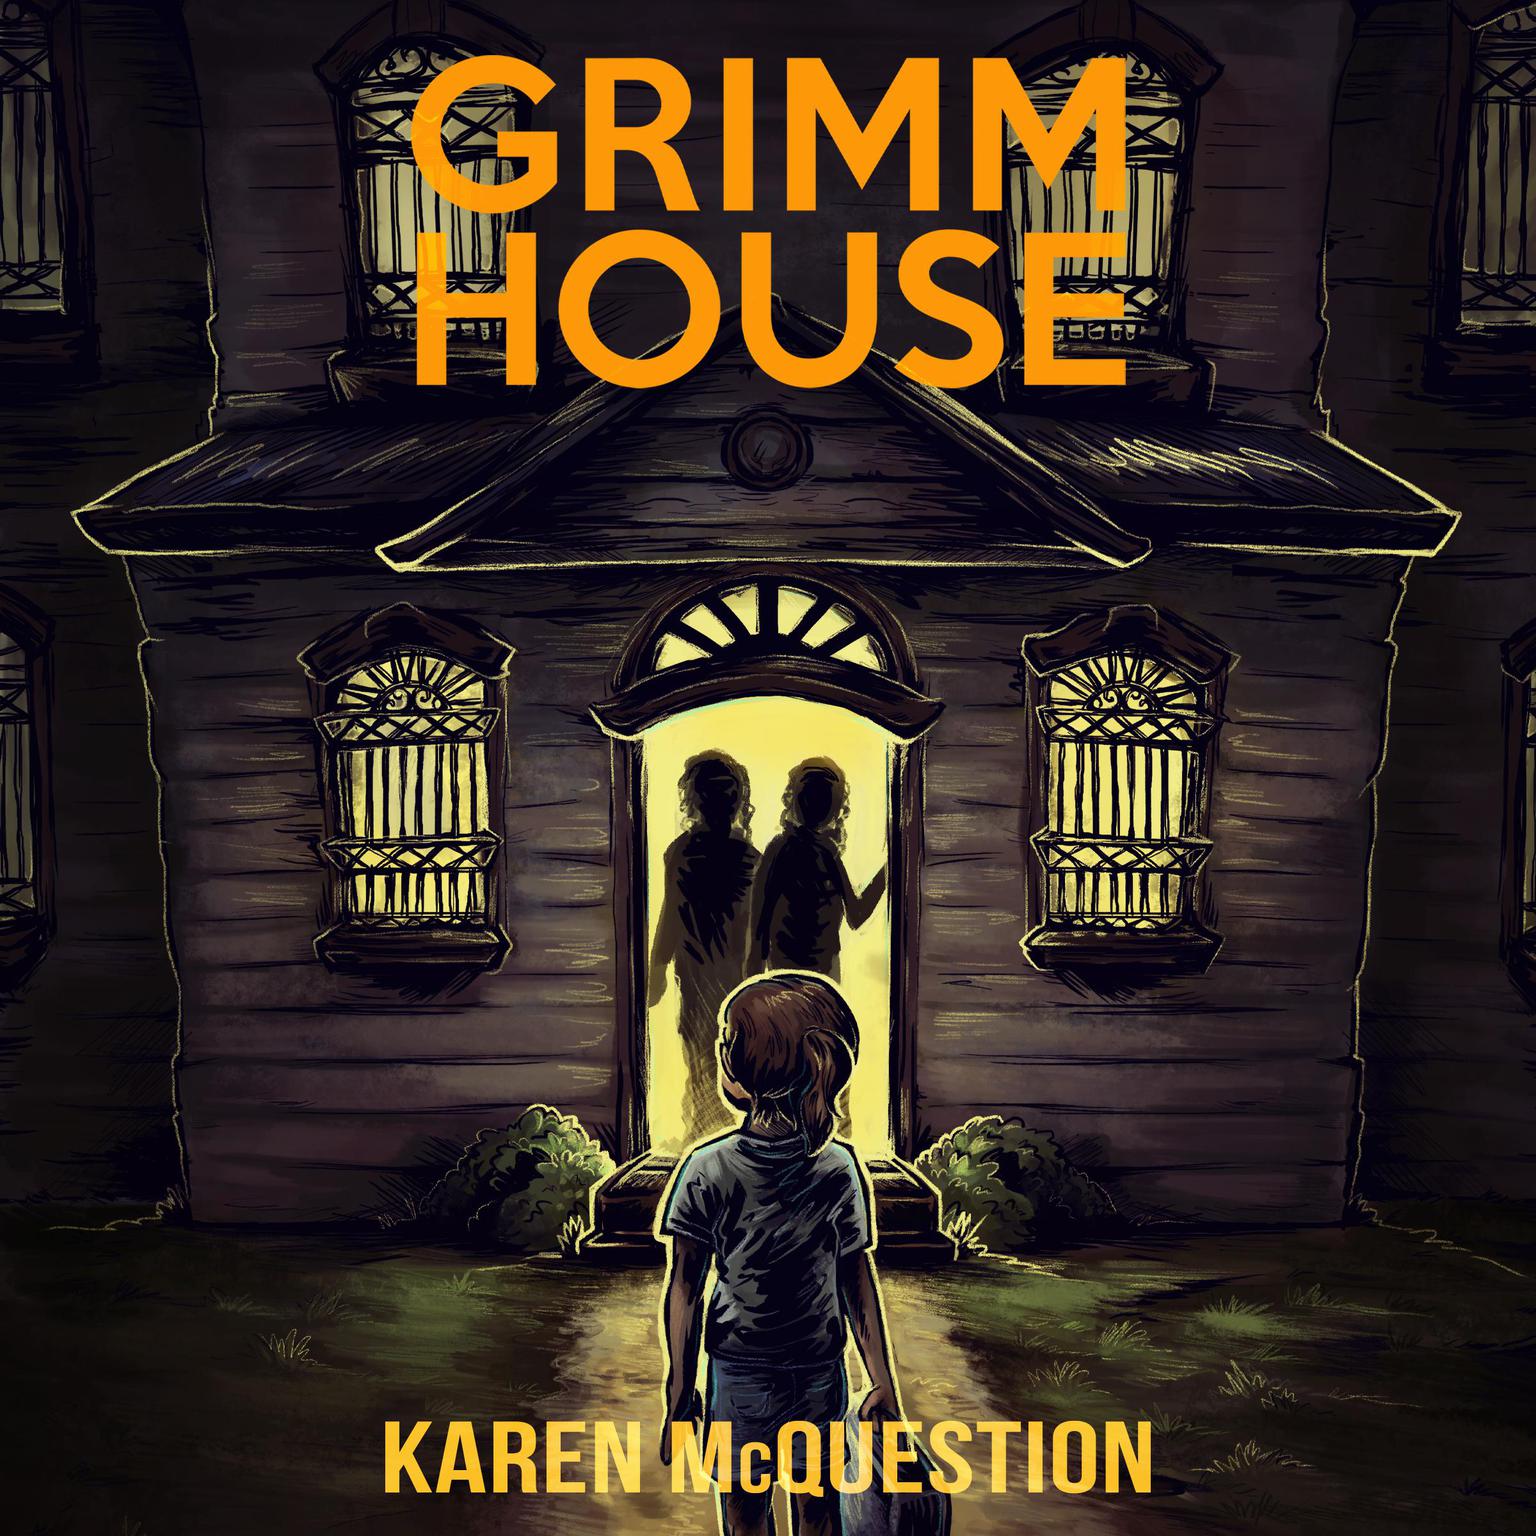 Grimm House: A Spooky Adventure for Kids Ages 7 - 11 Audiobook, by Karen McQuestion